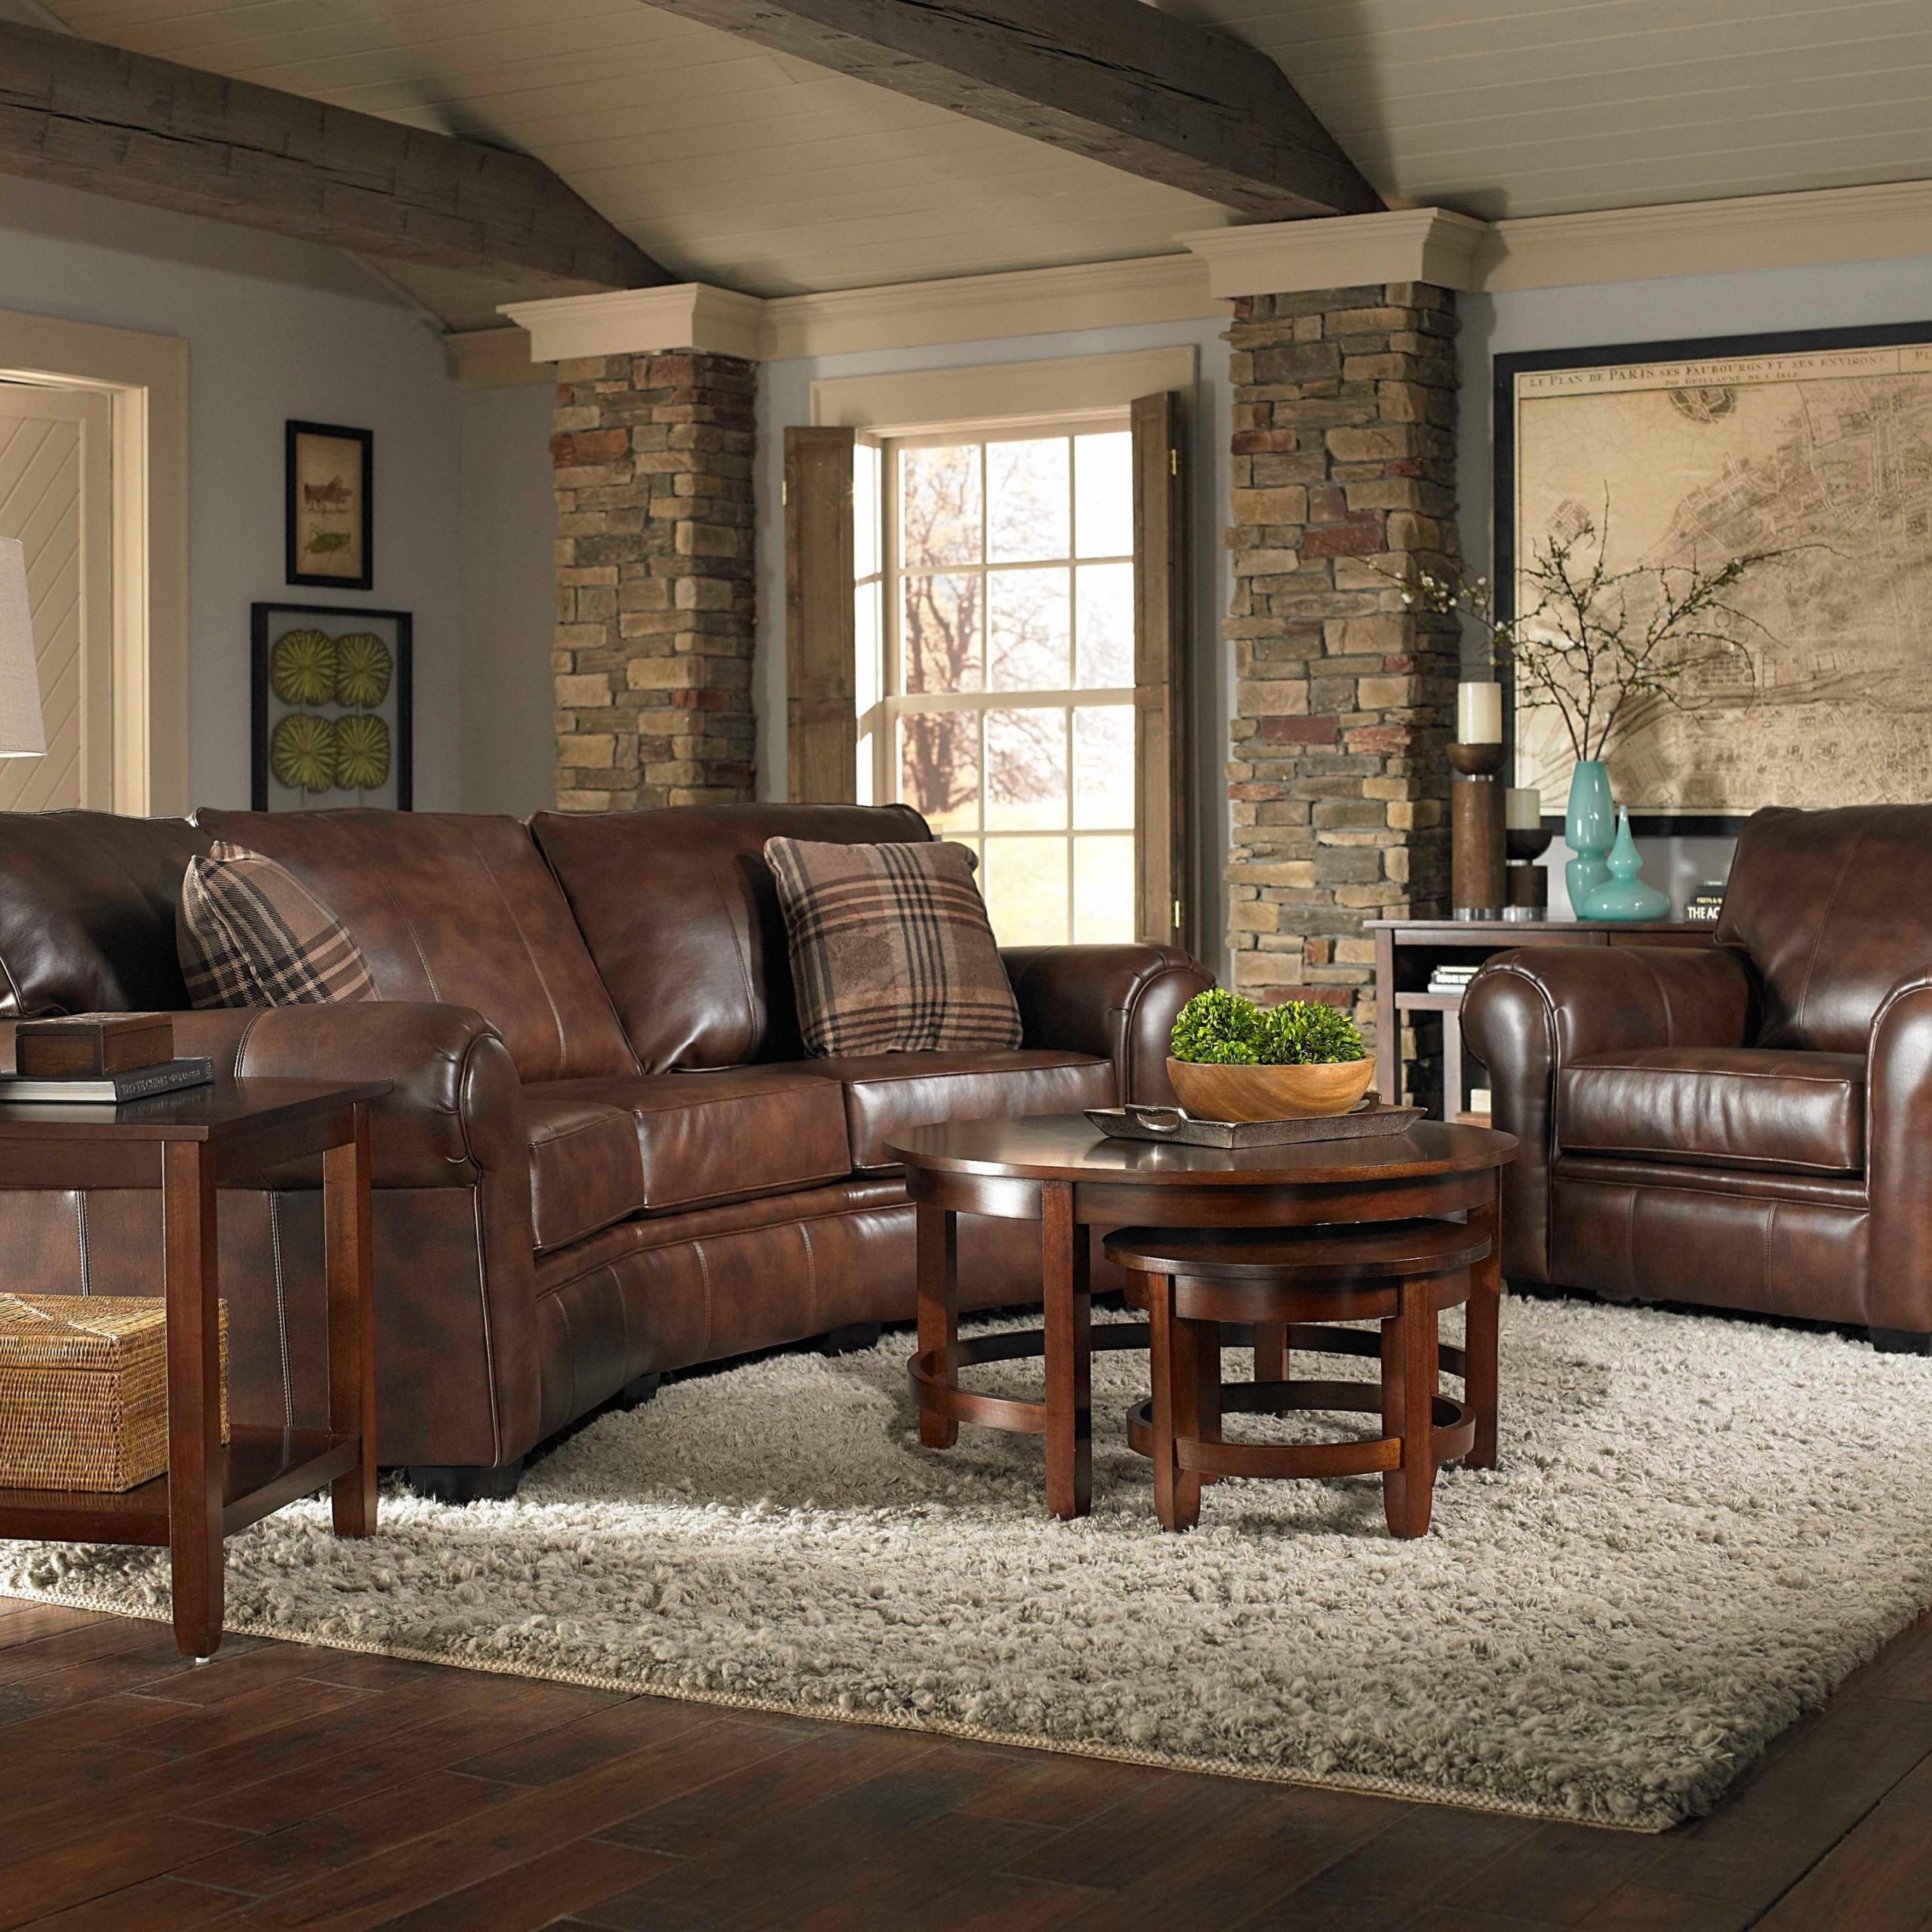 43+ Unbelievable Ideas Of Broyhill Living Room Furniture For 2Pc Maddox Left Arm Facing Sectional Sofas With Cuddler Brown (View 8 of 15)